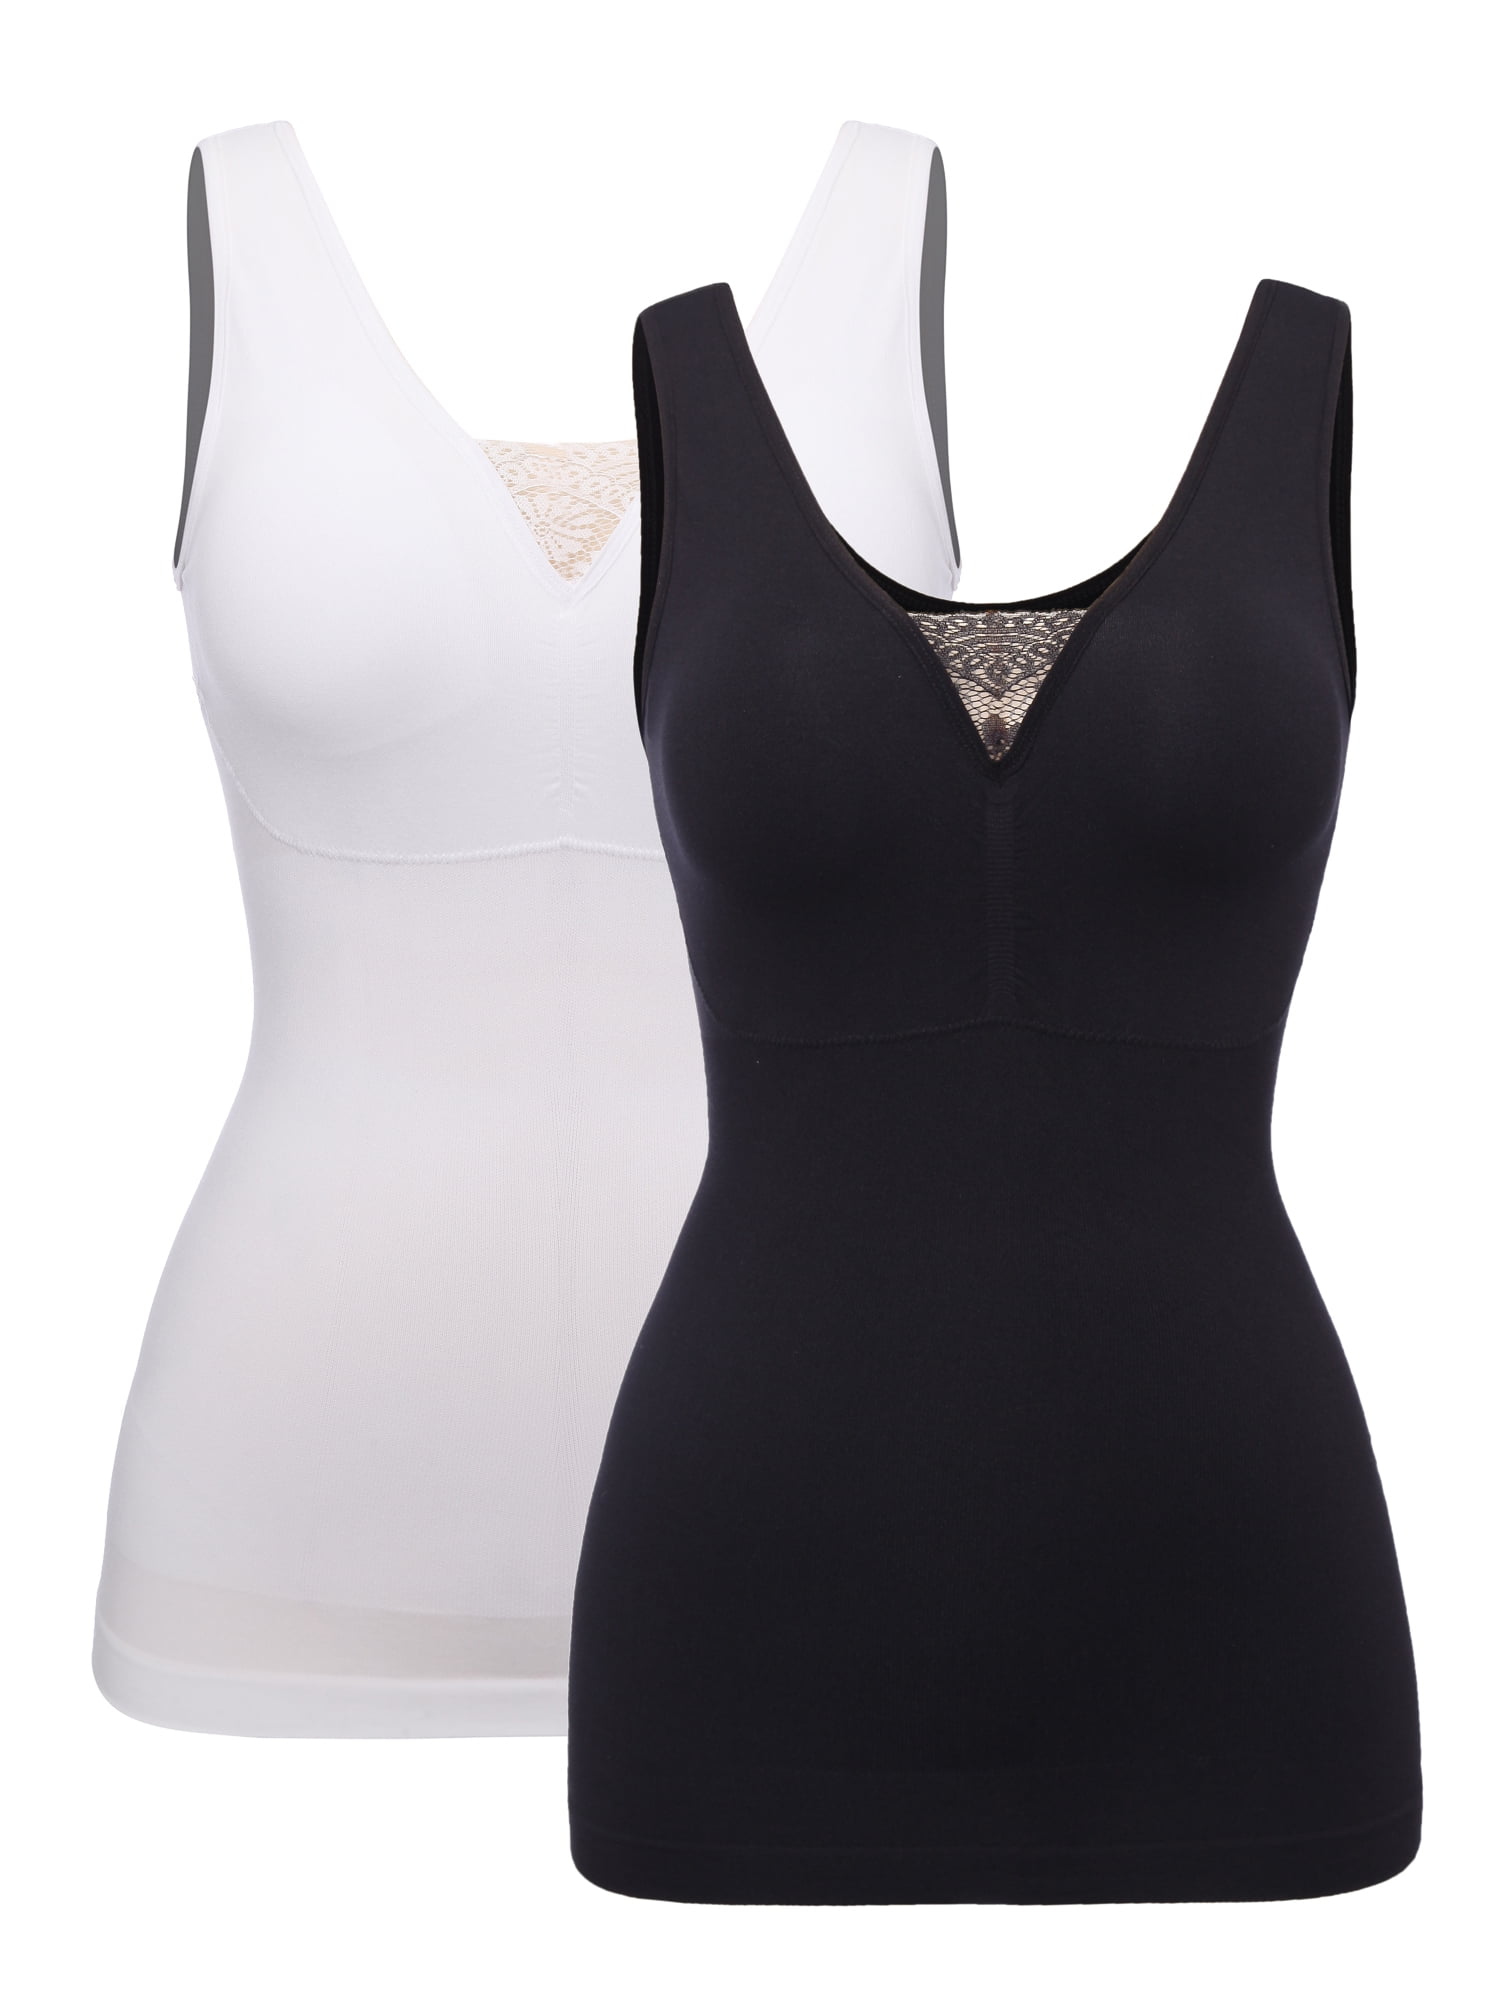 SLIMBELLE Womens Padded Camisole with Lace Cami Tummy Control Shapewear ...